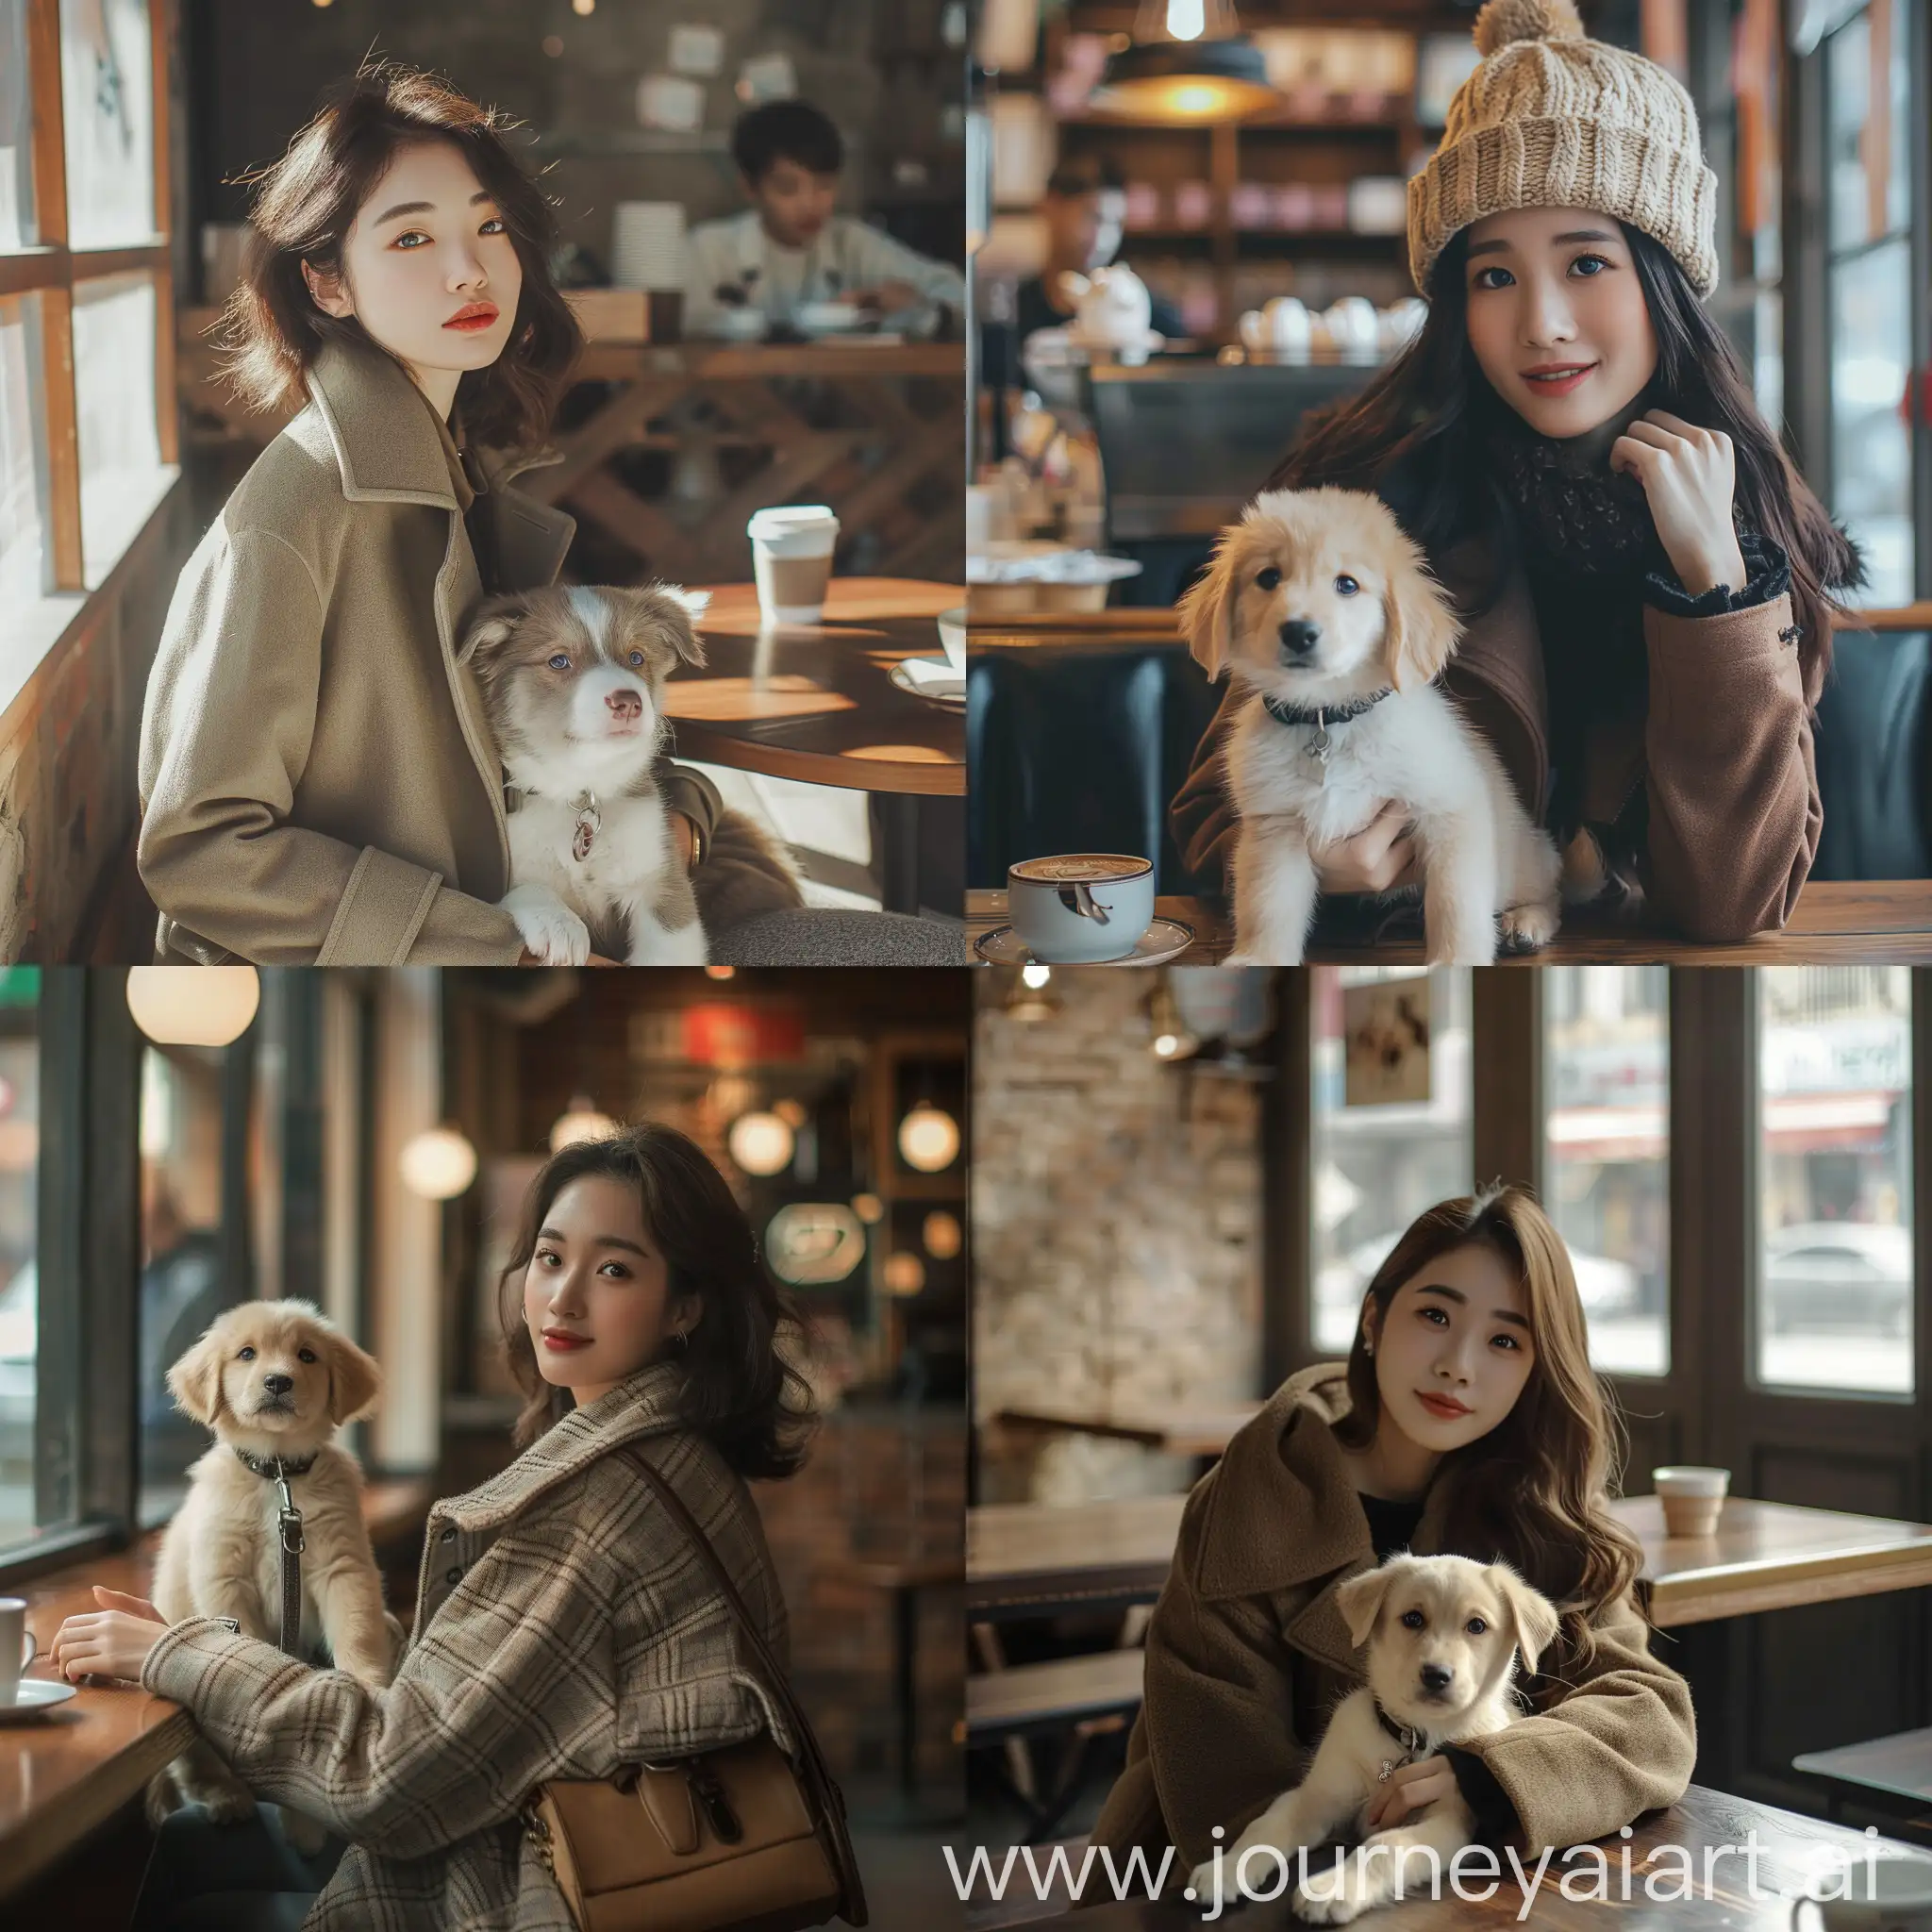 A beautiful Asian woman is sitting in a coffee shop with a lovely puppy in fashionable clothes, with cold light and realistic photos.